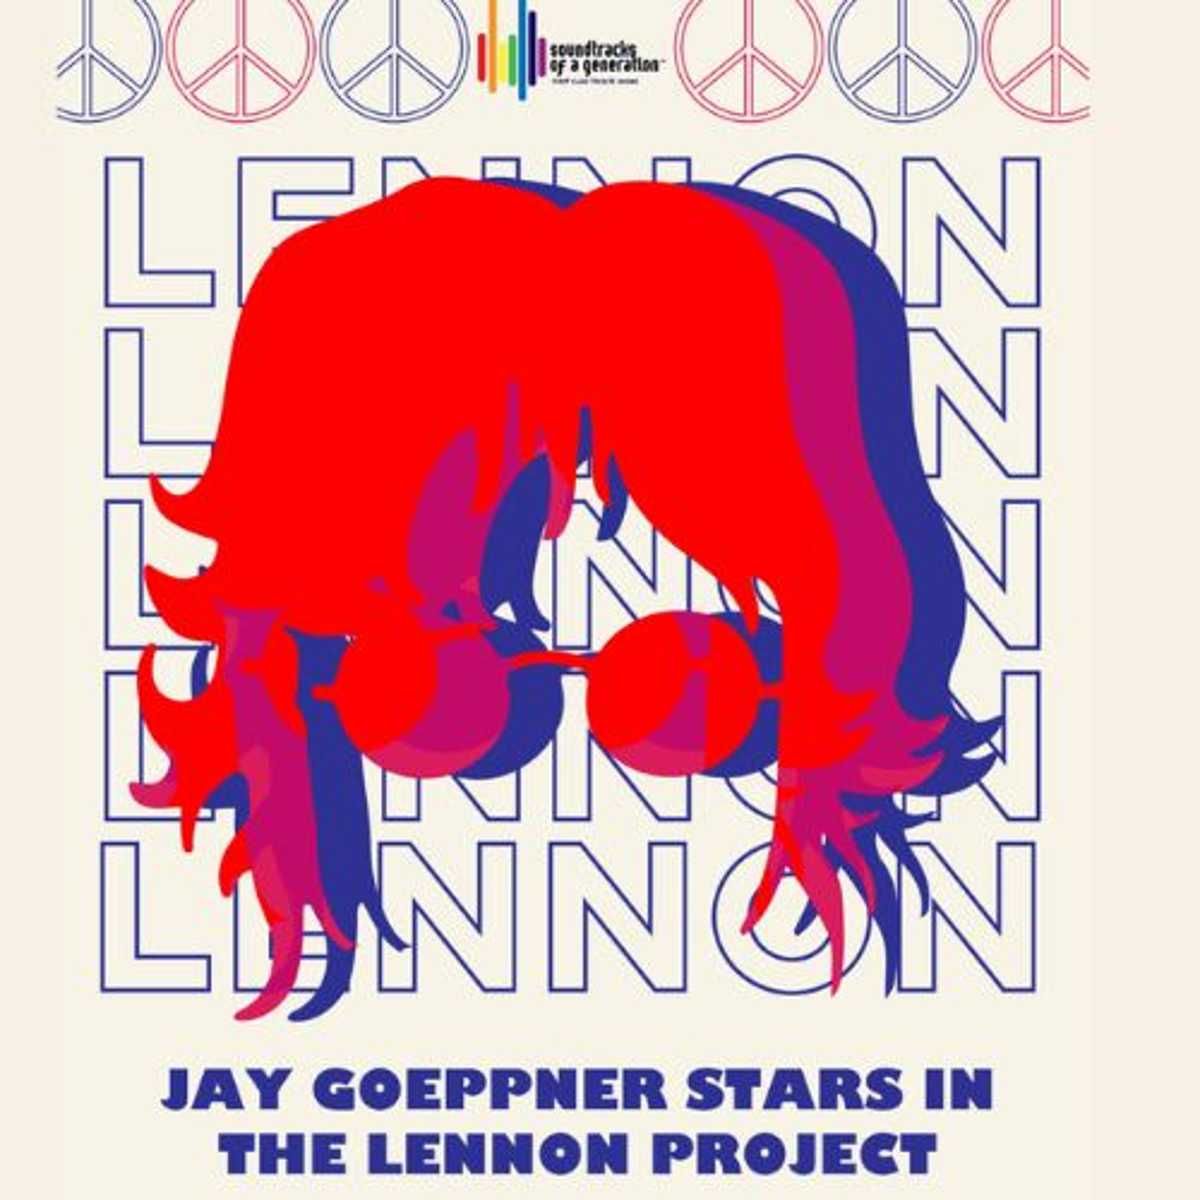 THE LENNON PROJECT